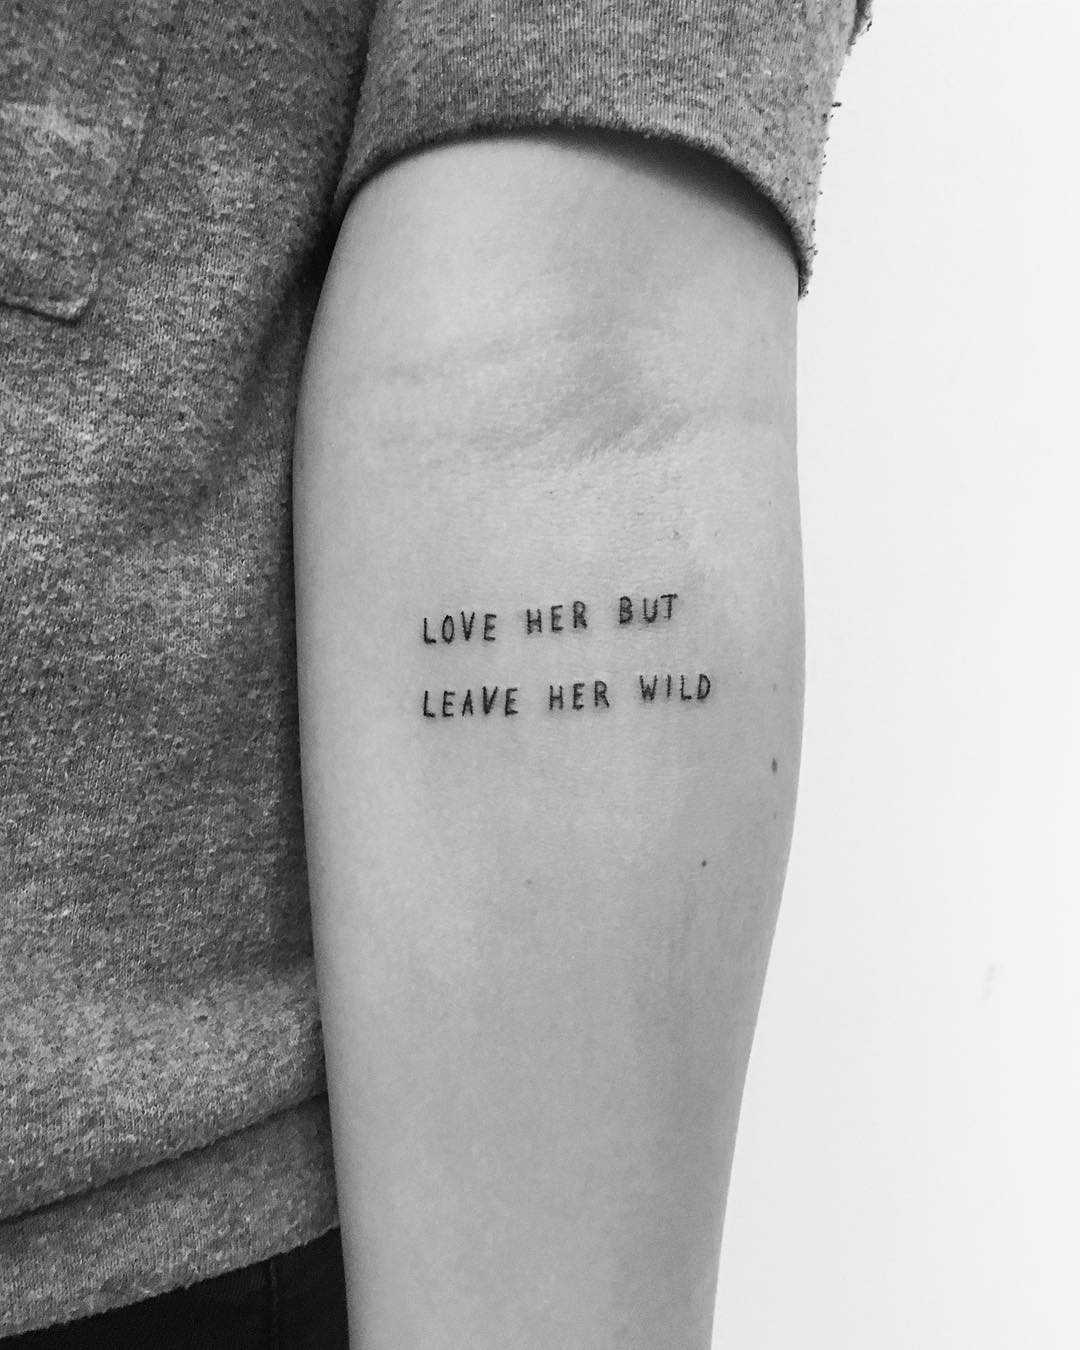 Love her but leave her wild by Philipp Eid